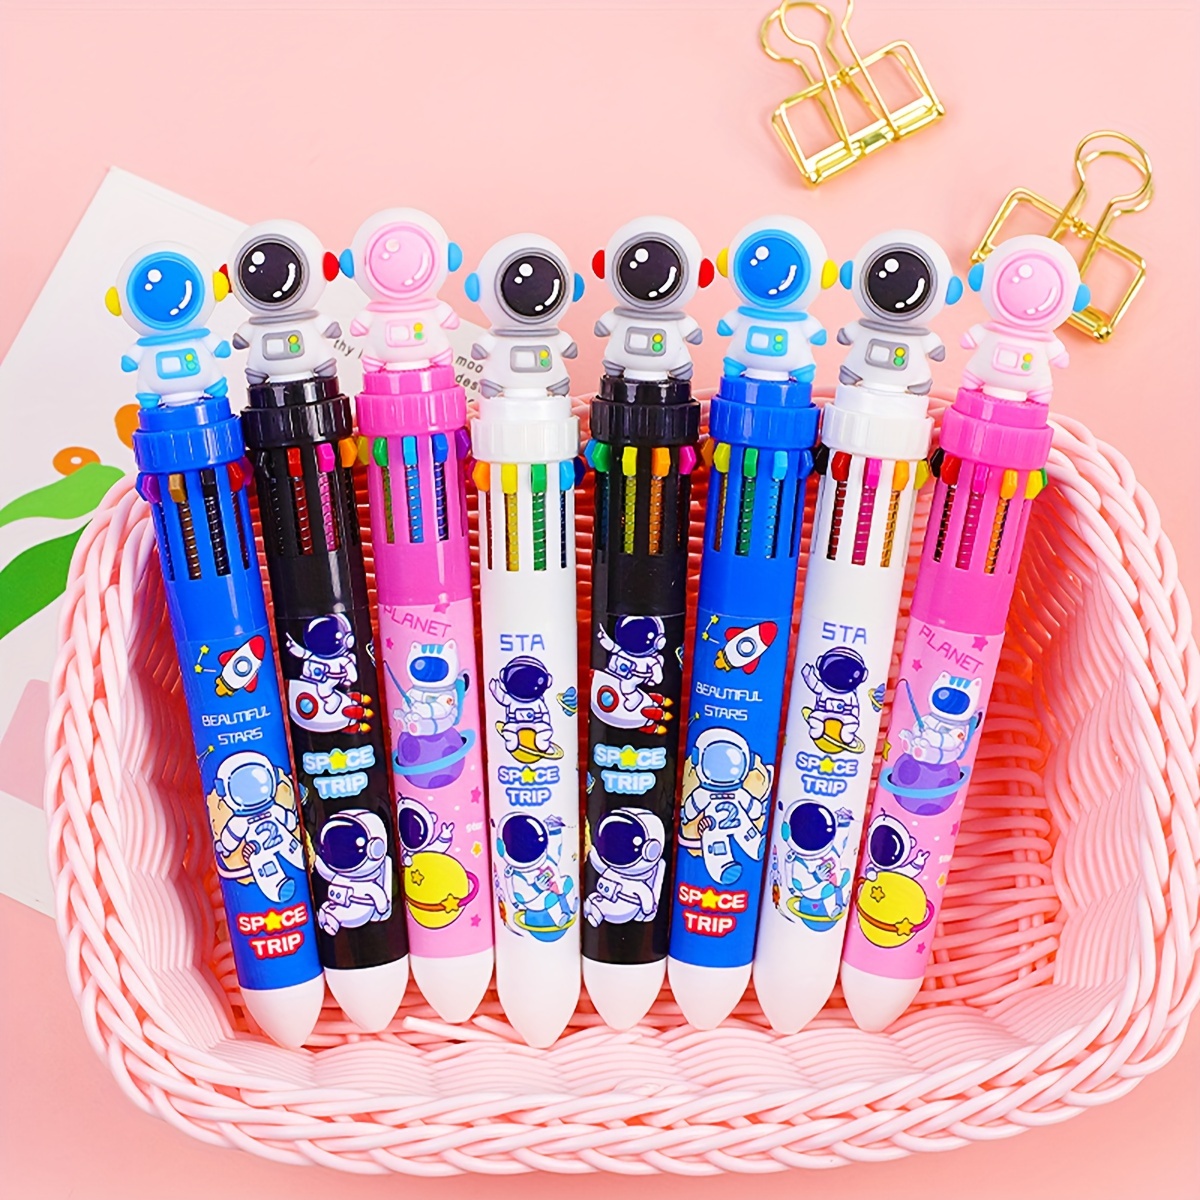 YiFudd 10 Color Ballpoint Pen,Multi Colored Pens In One,Cartoon New Tiger  Multicolor Ballpoint Pen,Push Type Color Multifunction Marker For Work,  School Supplies For Study 